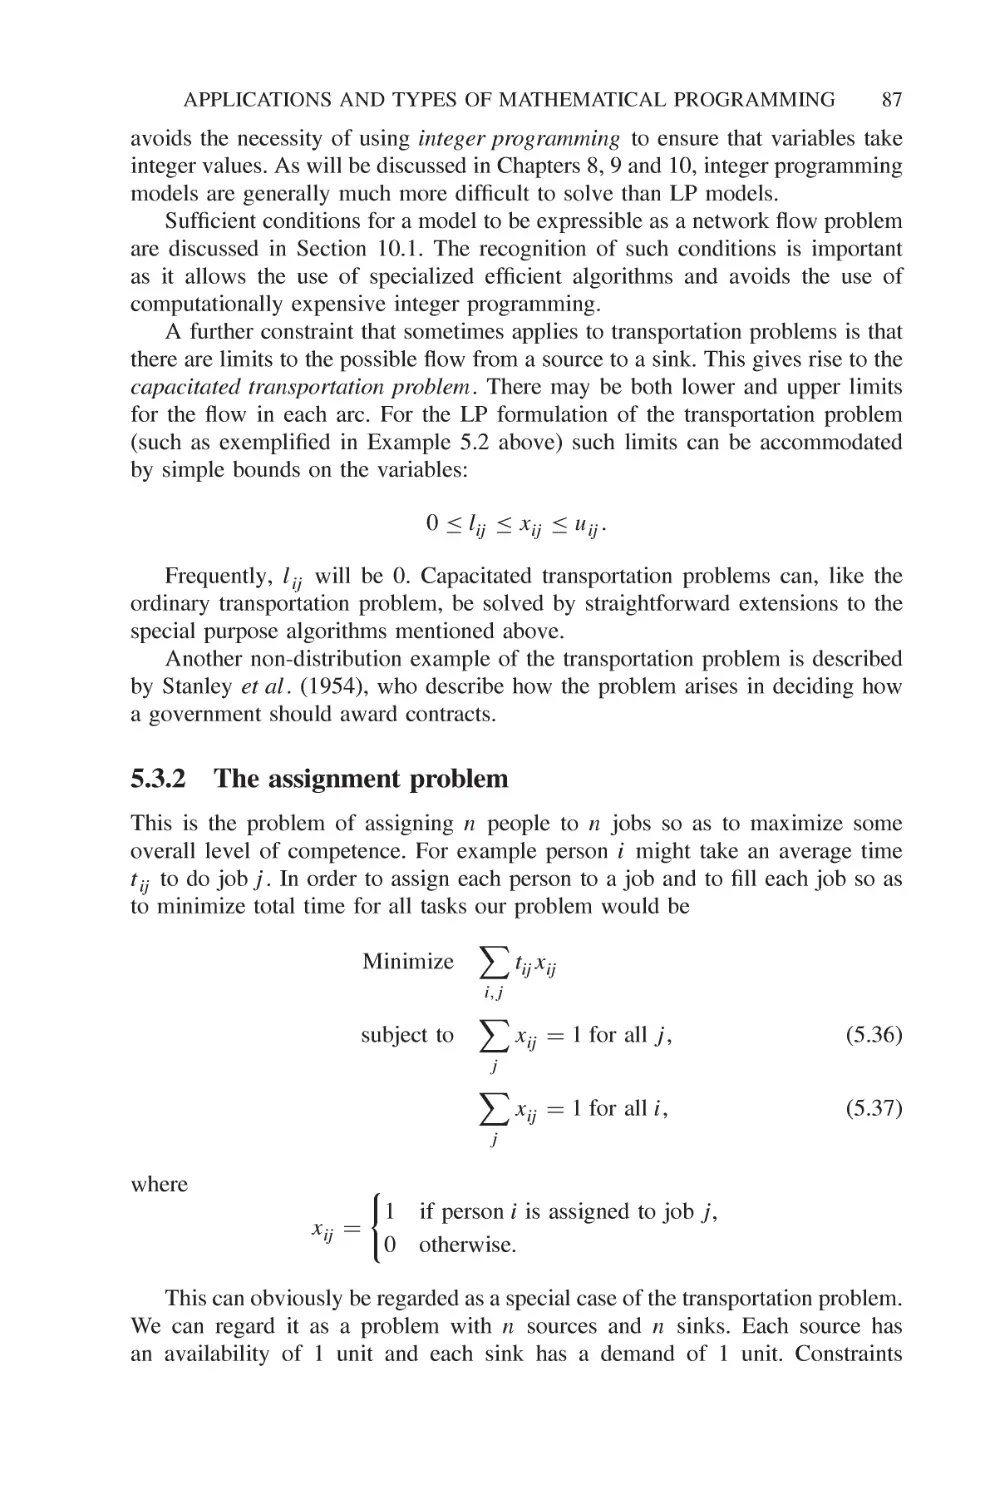 5.3.2 The assignment problem